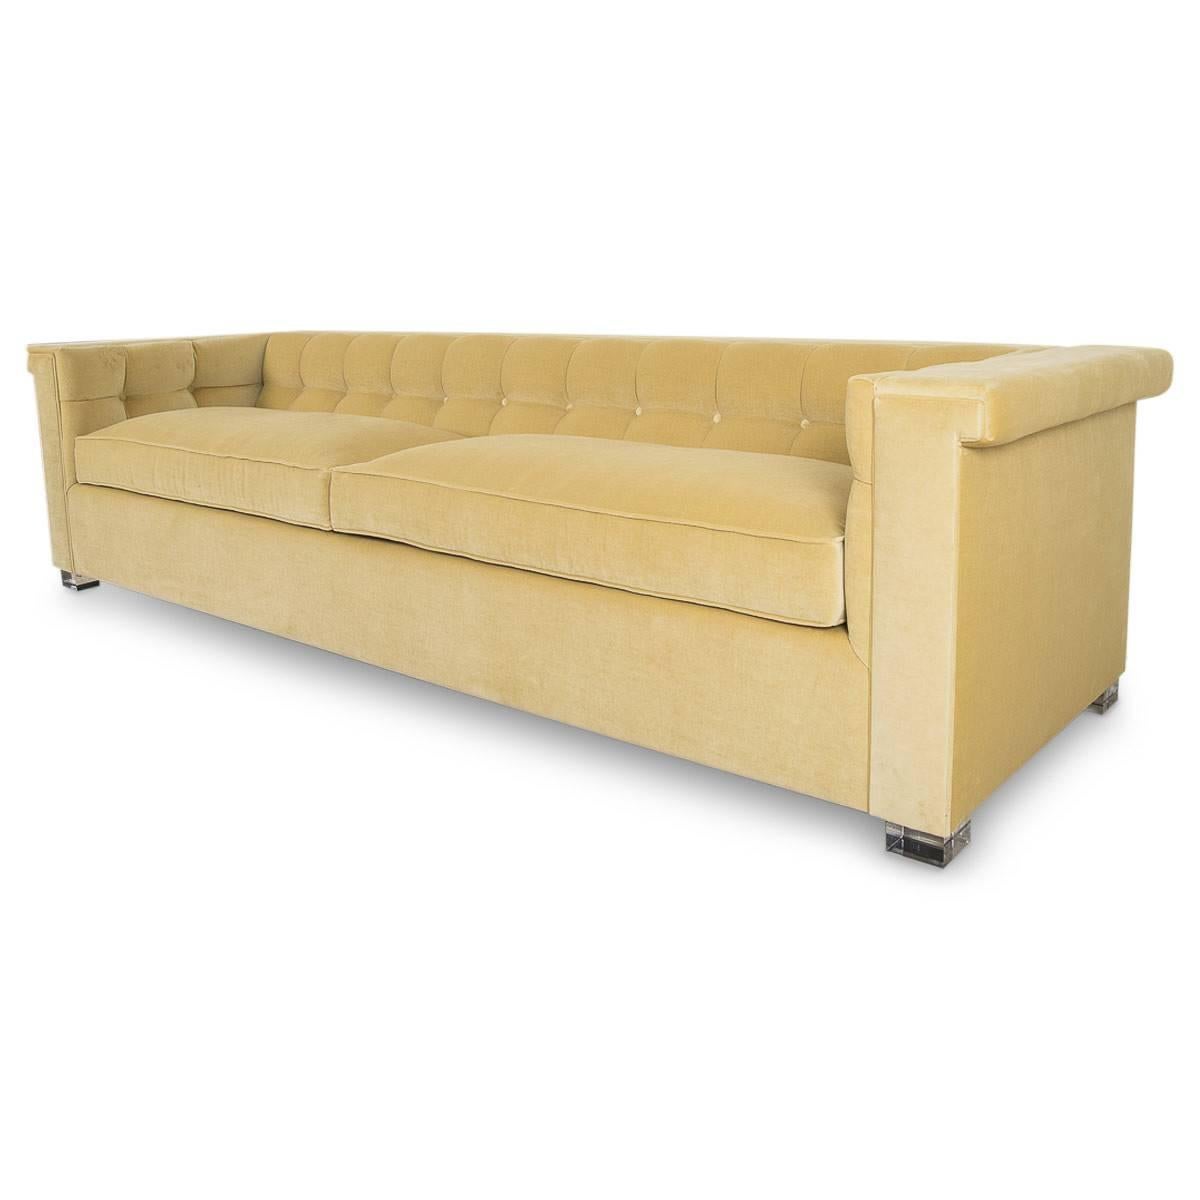 This is the kind of sofa you can have in a lounge or a study and it just sets the mood. Completely tufted in rich, smooth Como Mustard velvet. This sofa has all the style and cool that one can ask for. From the deep seat to the wide arms, it's ready